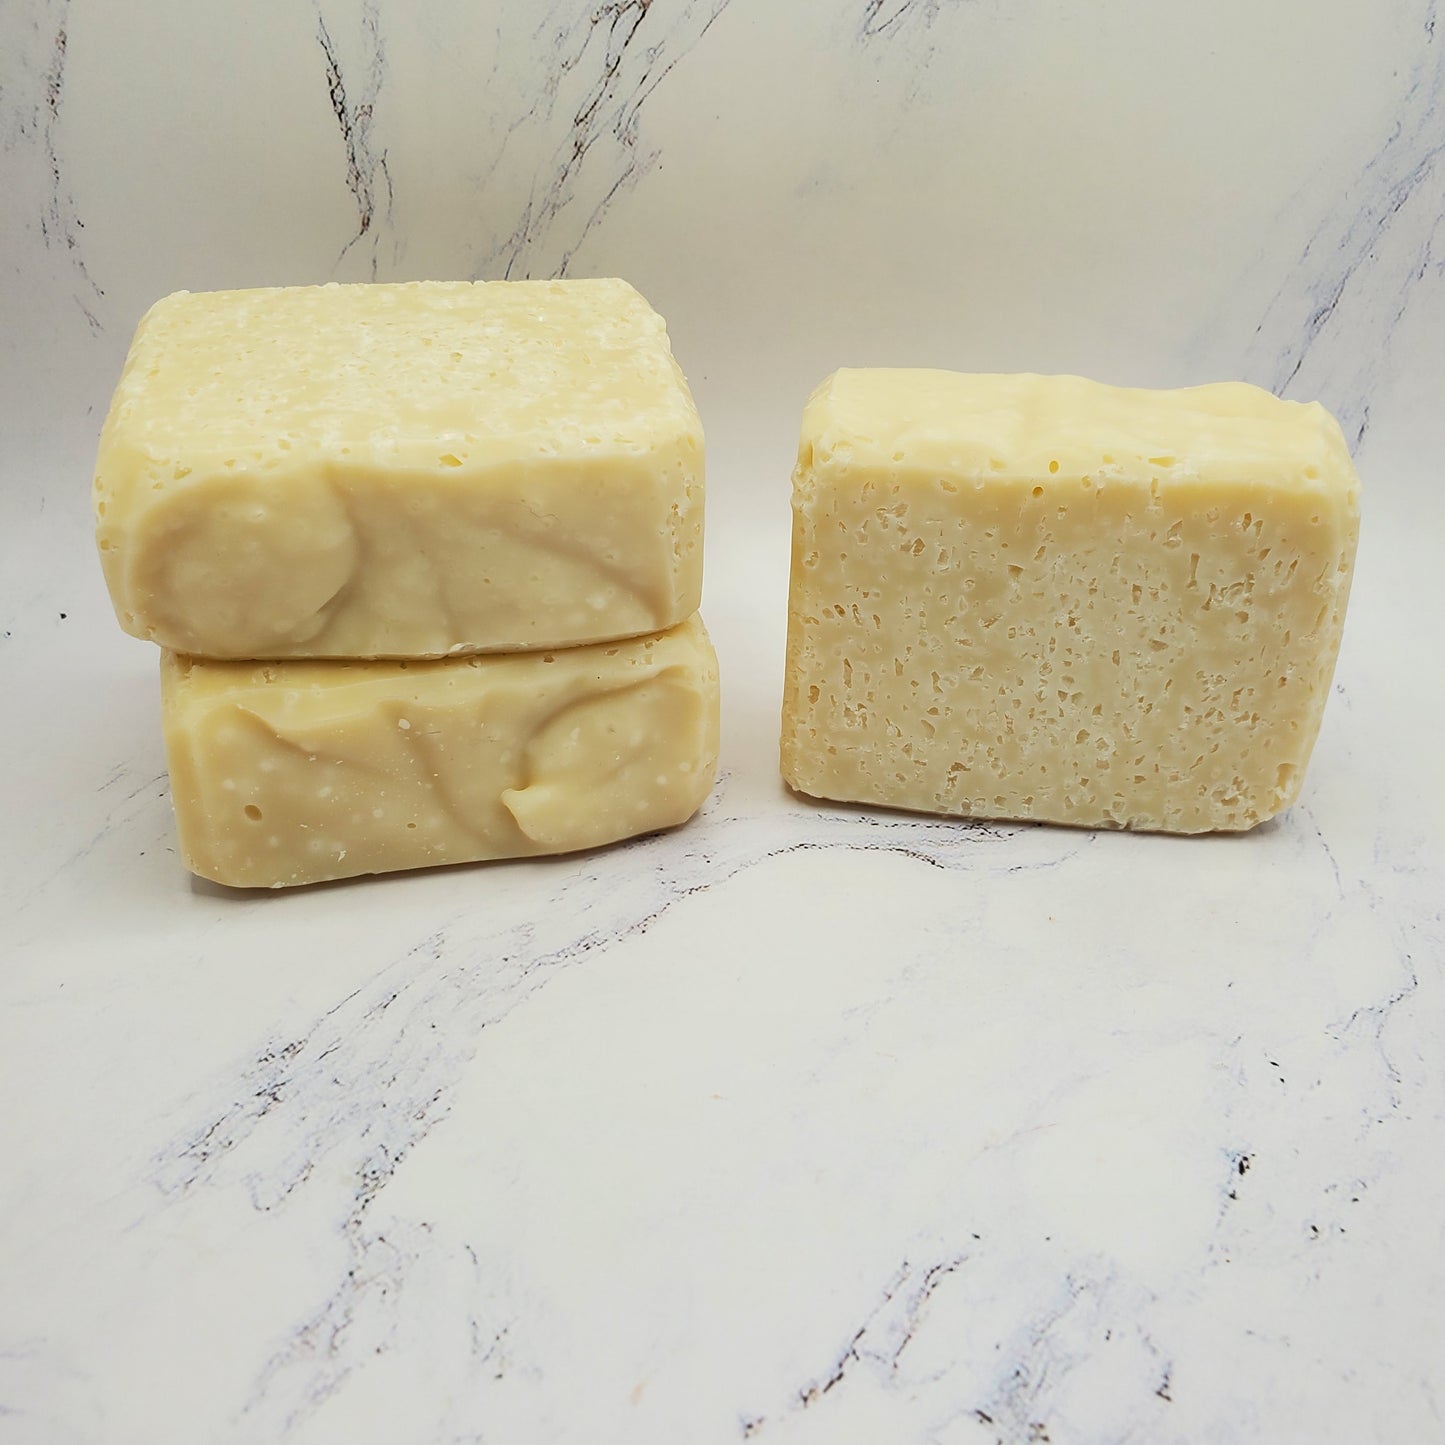 Salt & Aloe Bar Soap with Rosemary and Peppermint Essential Oils